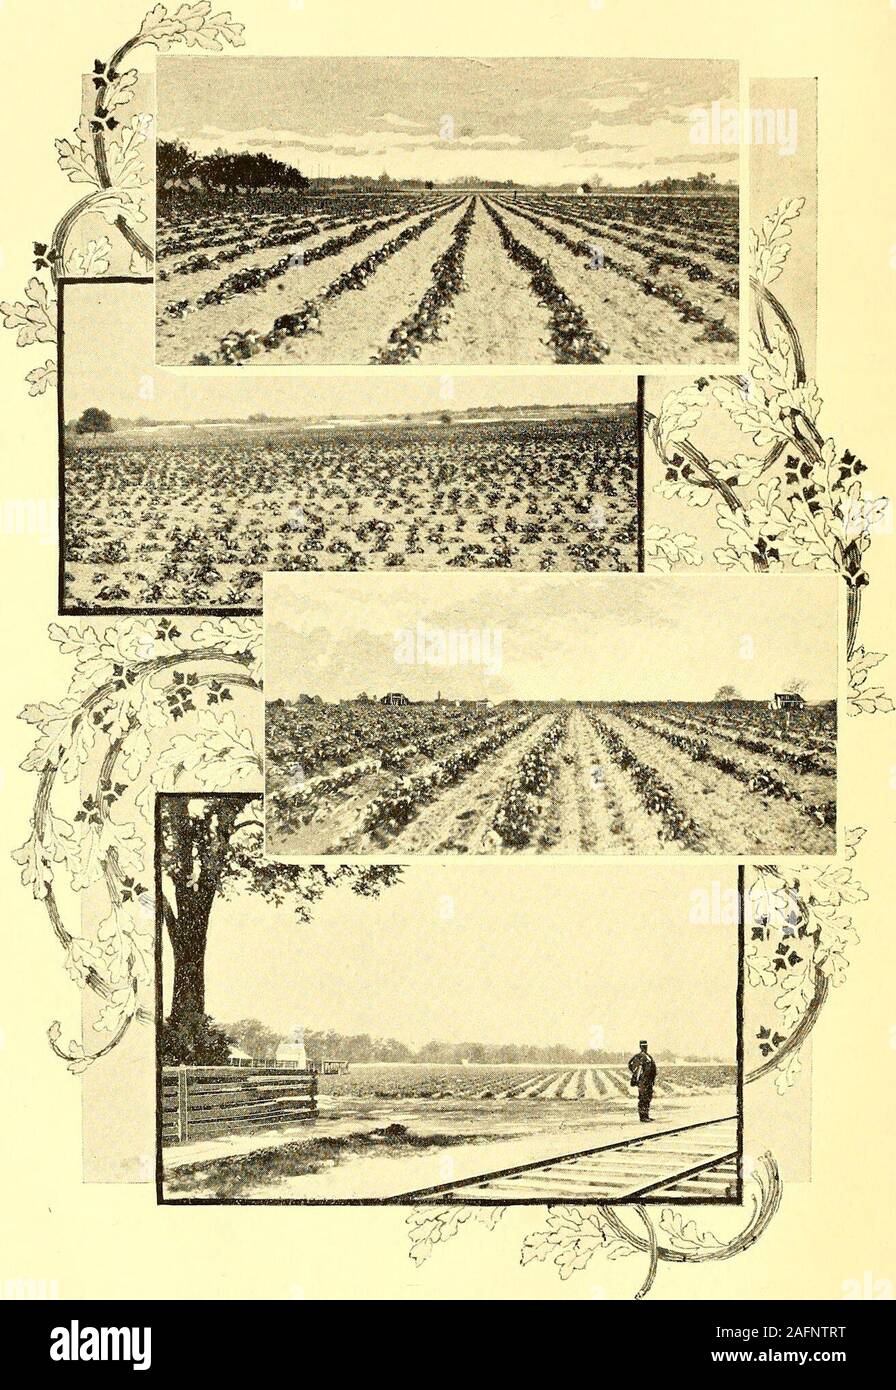 . North Carolina and its resources. ricots, nectarines, cherries, mulberries,grapes, pecans, English walnuts, Japan chestnuts, with many thous-ands of roses and ornamental trees and shrubbery. Four green-houses are used in the propagation and growth of ornamental plants.The nurseries occupy about three hundred acres of land. Greensboro Nurseries.—These nurseries are in the sameneighborhood as the Pomona nurseries, and this business is more ex-tensive about Greensboro than elsewhere in the State. Mr. John A.Young is the proprietor. They are east of the city of Greensboro, andhave at various tim Stock Photo